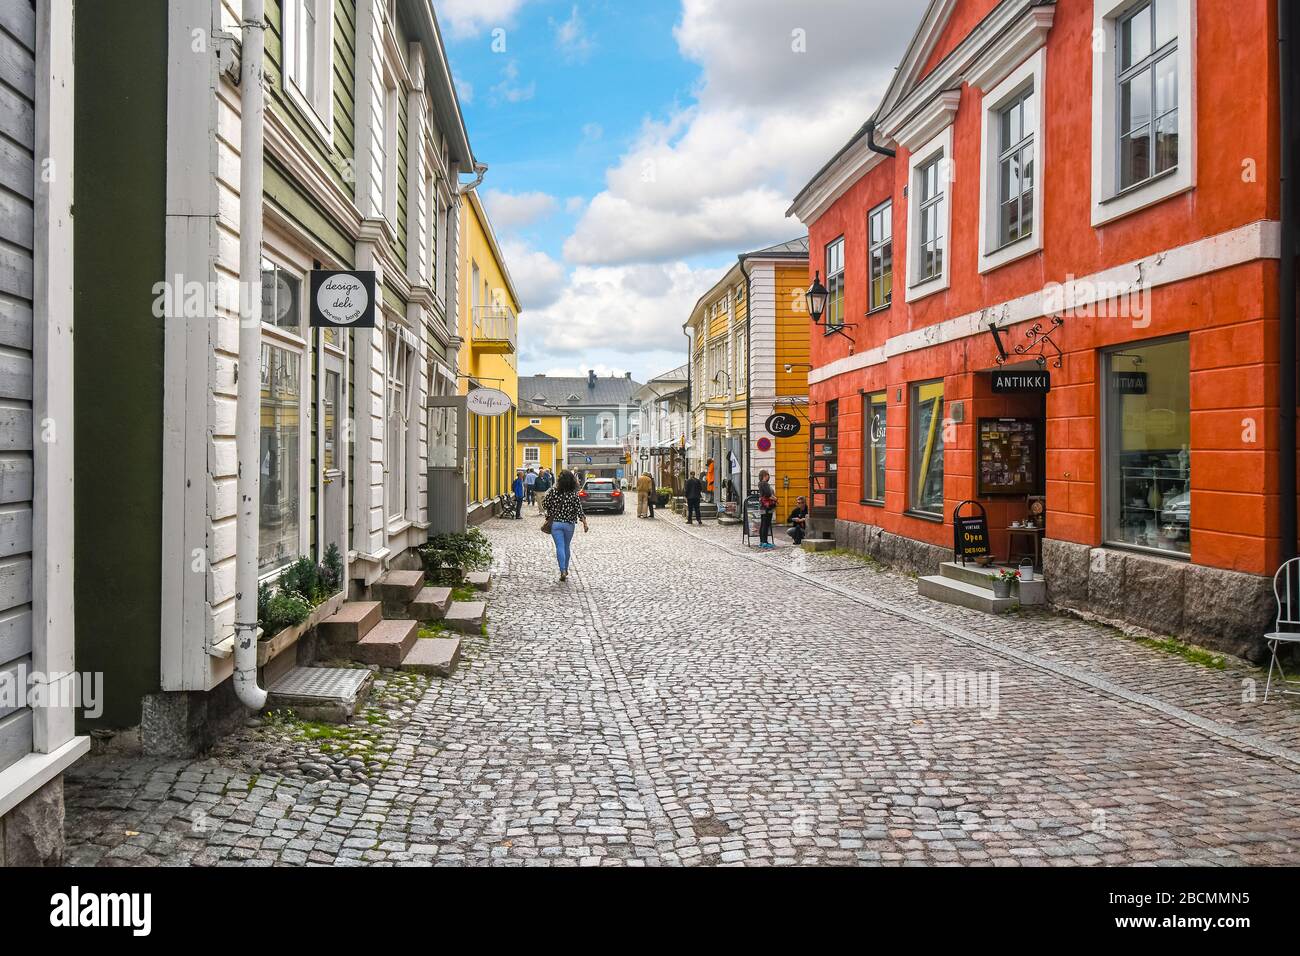 Tourists enjoy sightseeing and shopping on one of the cobblestone streets in the colorful, medieval town of Porvoo, Finland. Stock Photo